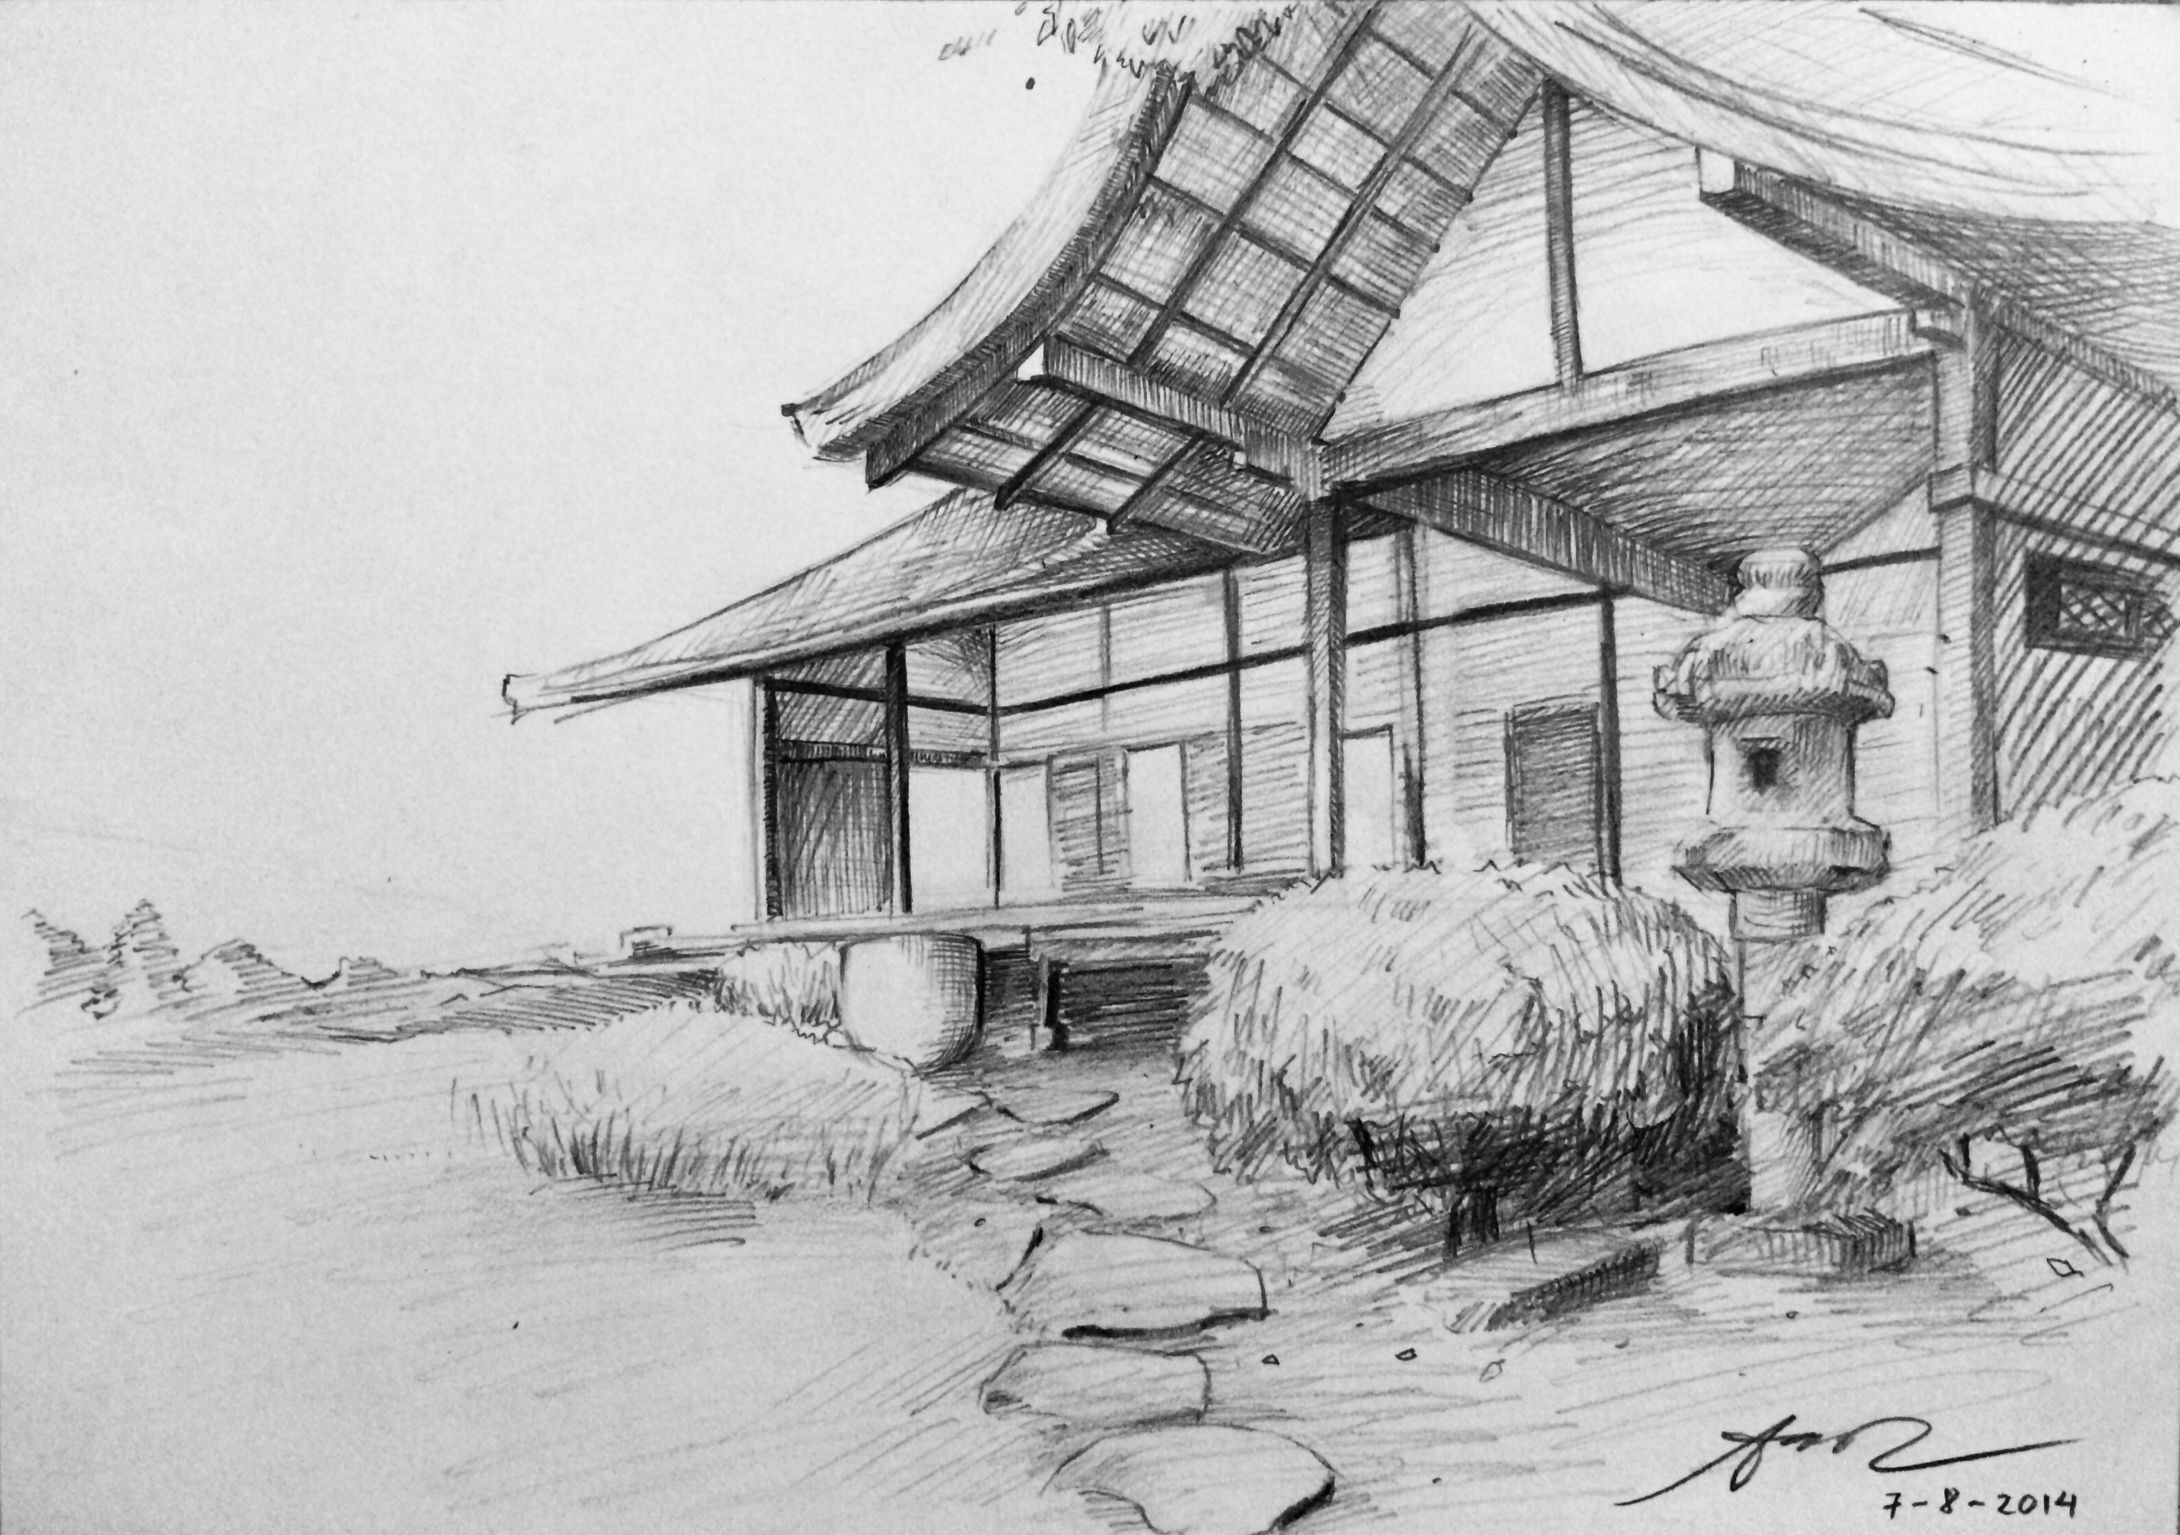  Traditional Japanese House sketch by AoiCancerius on 